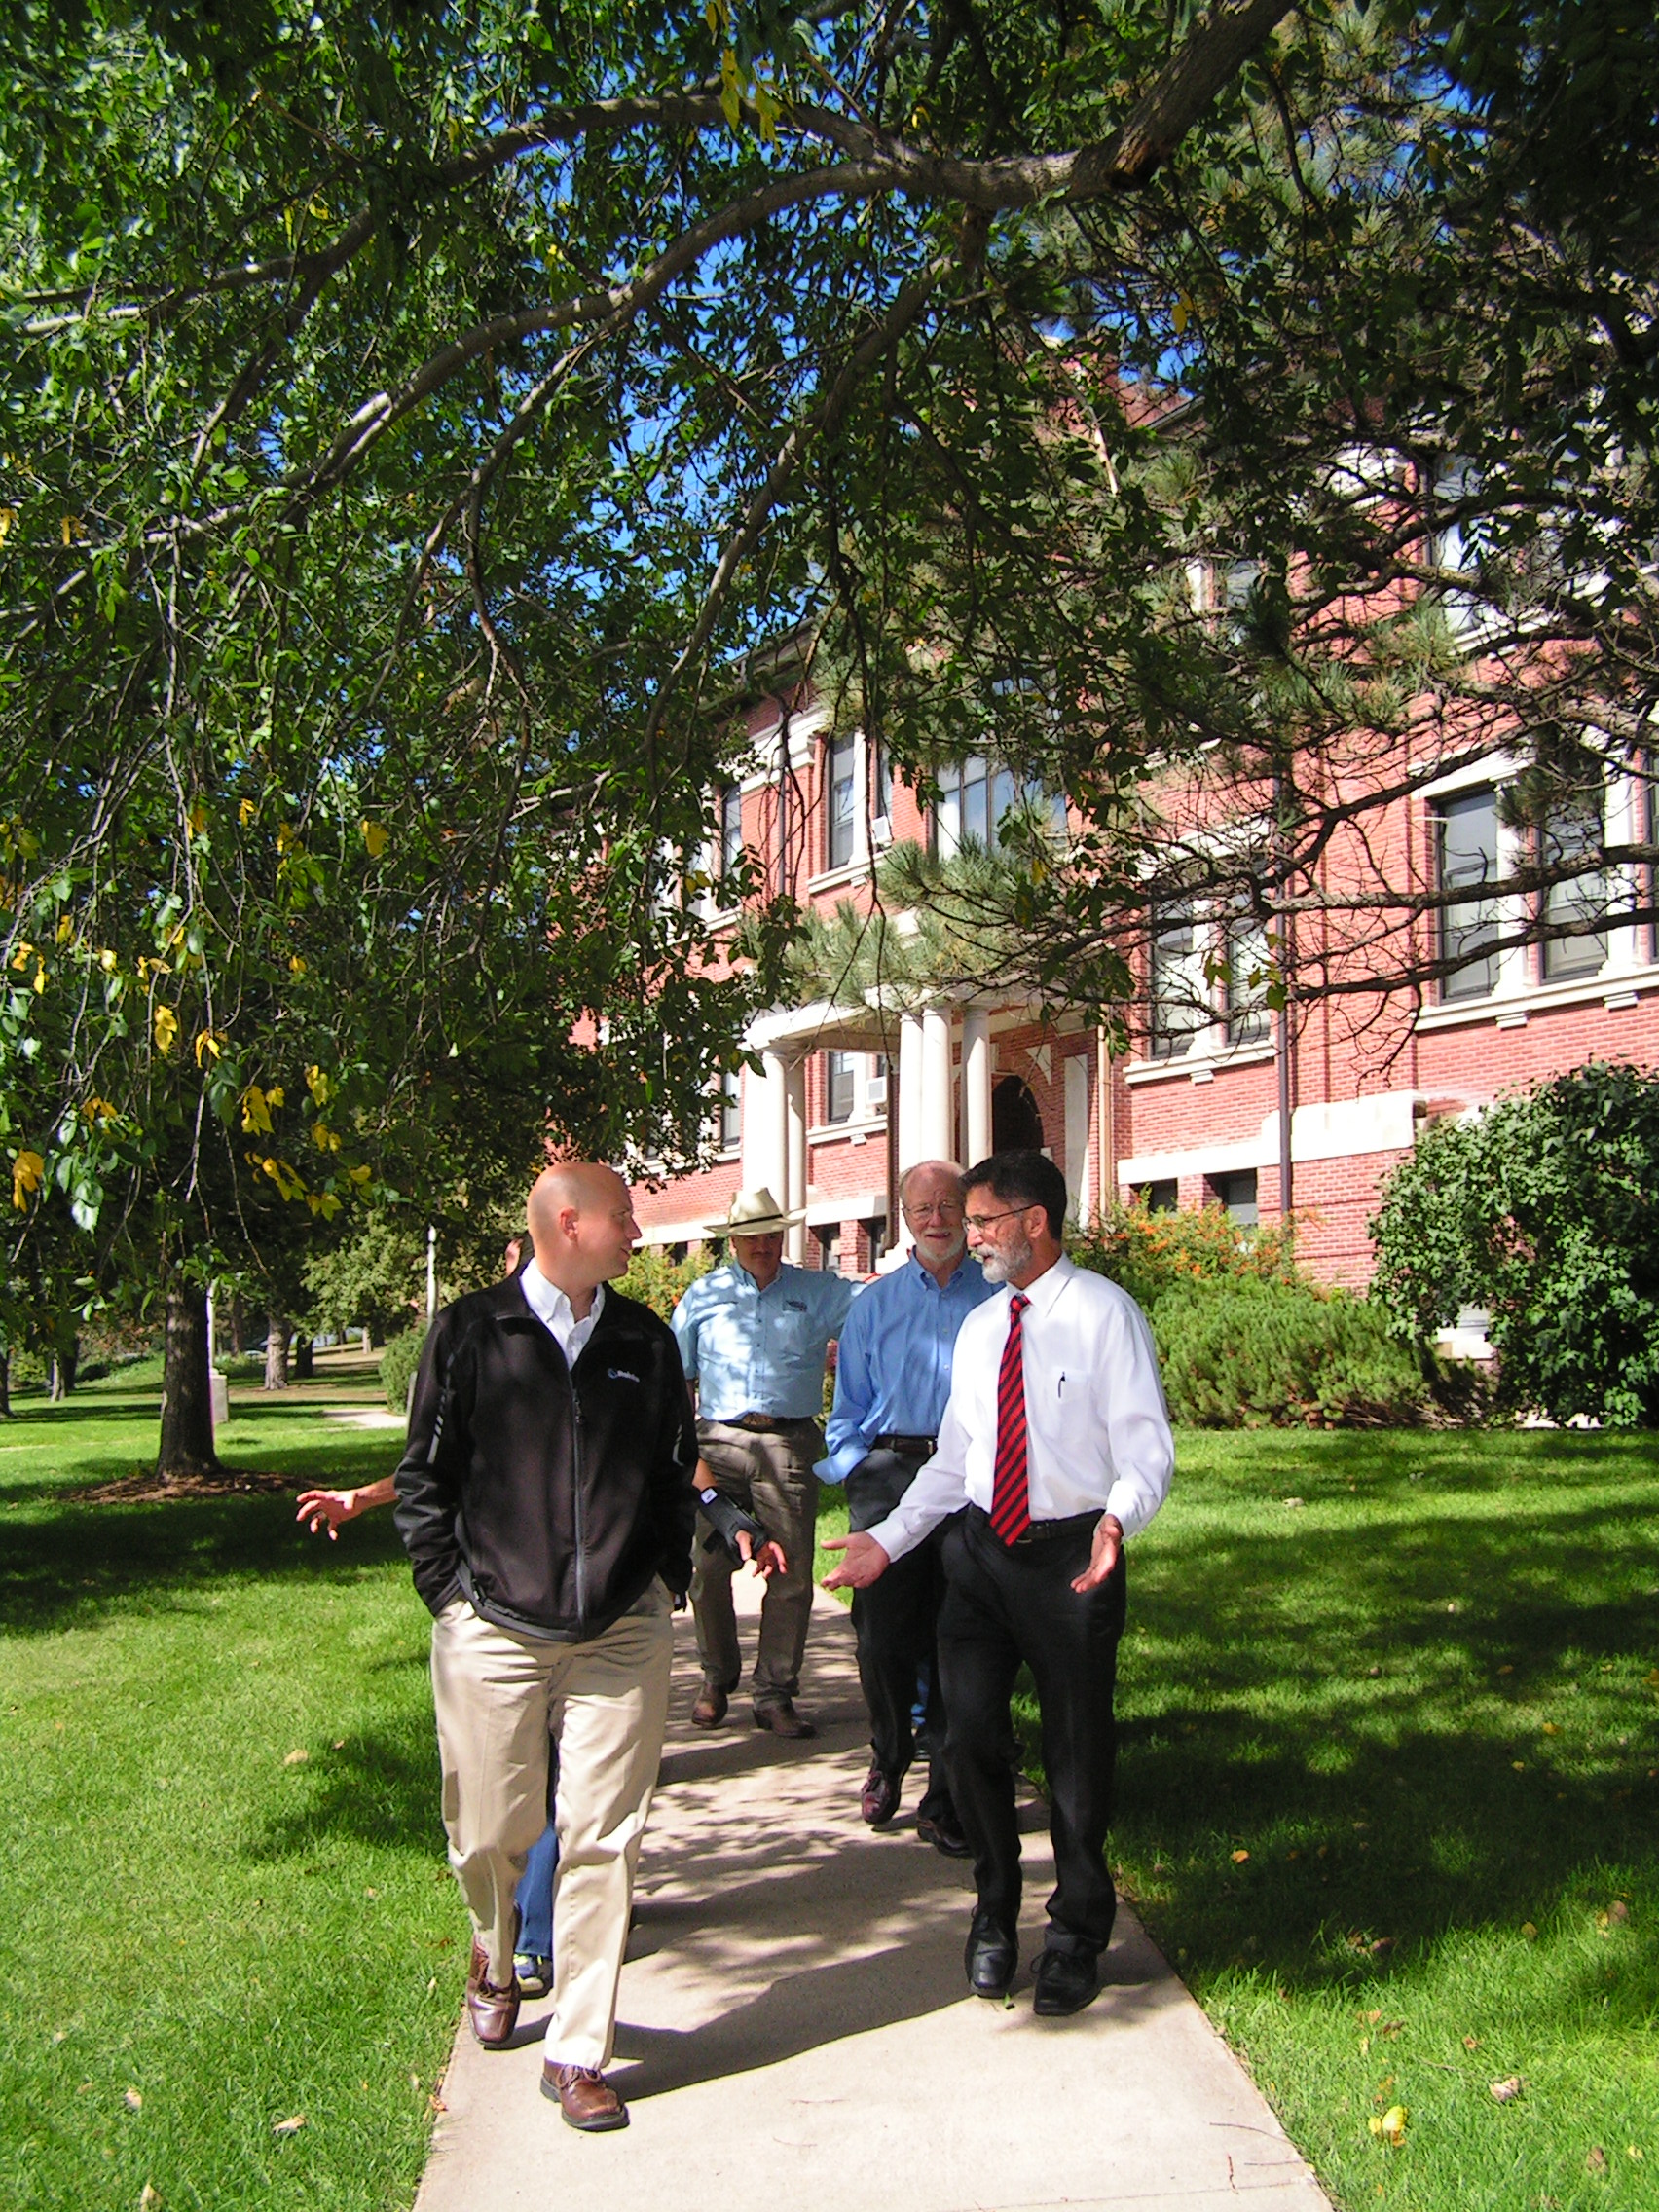 NCTA Dean Ron Rosati leads a campus tour below the huge trees near Ag Hall in 2014. (NCTA photo)